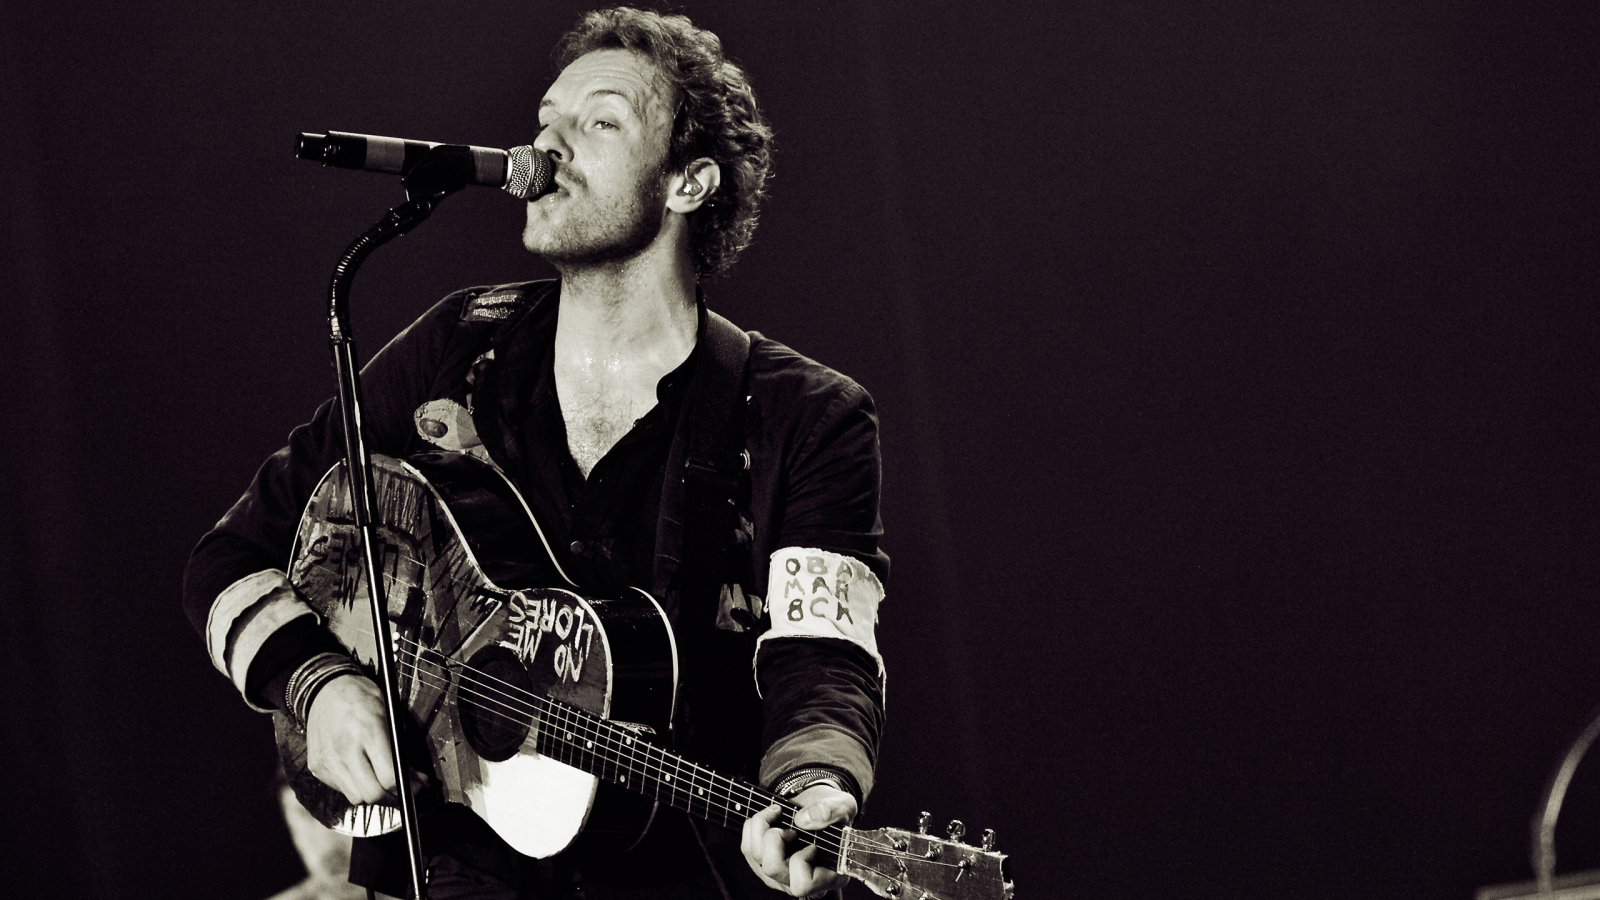 Chris Martin Coldplay for 1600 x 900 HDTV resolution